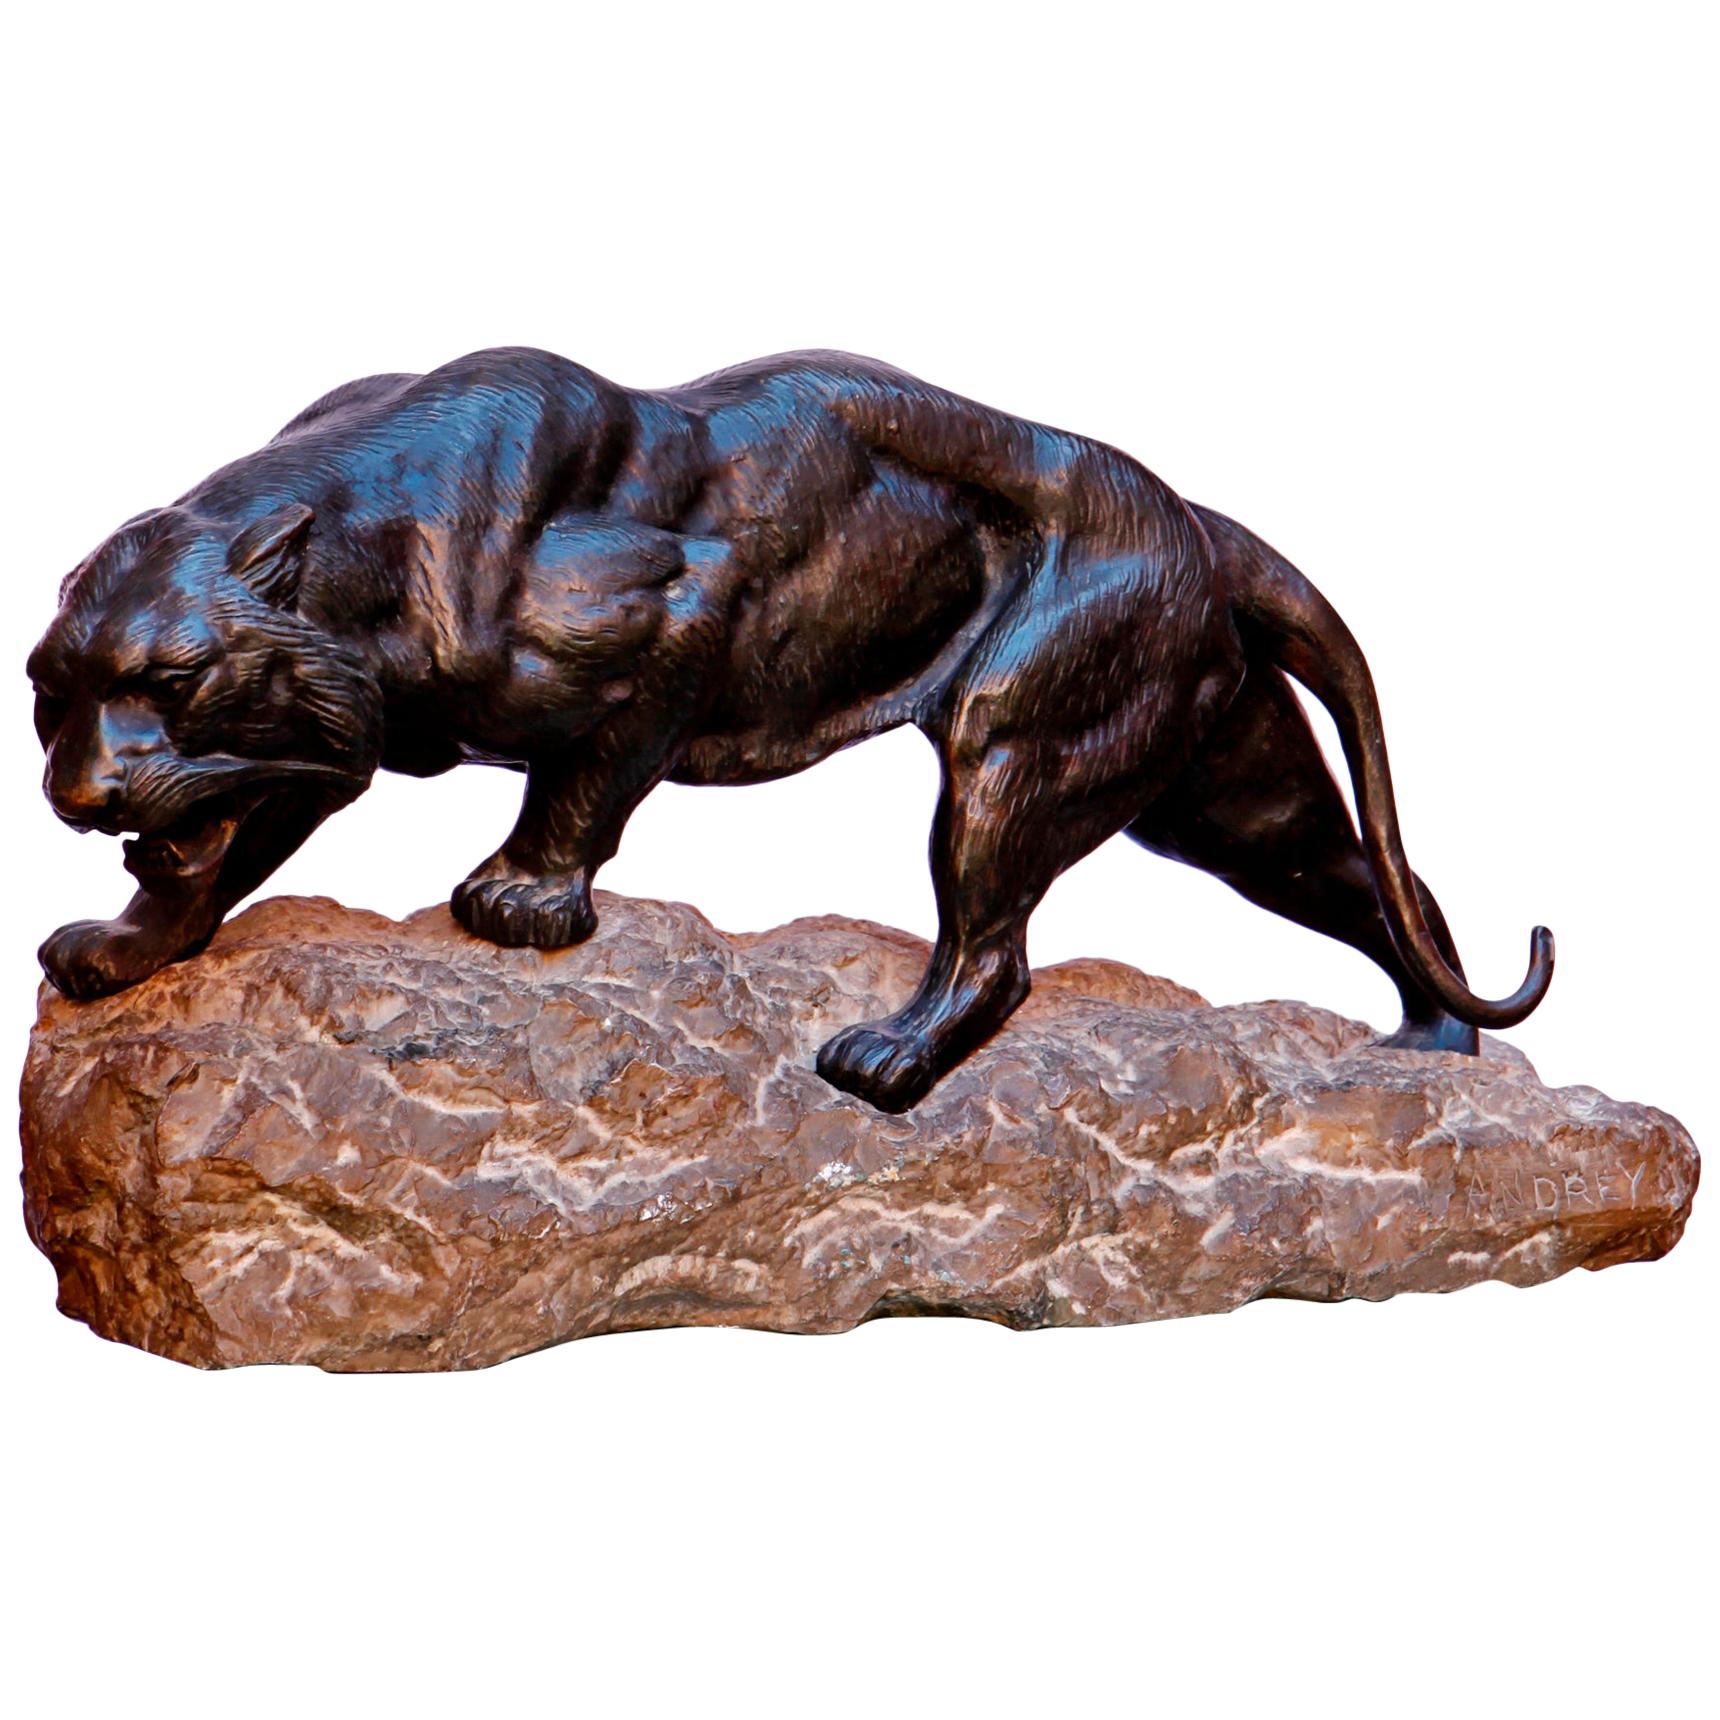 20th Century French Bronze Figure of a Crouching Lion